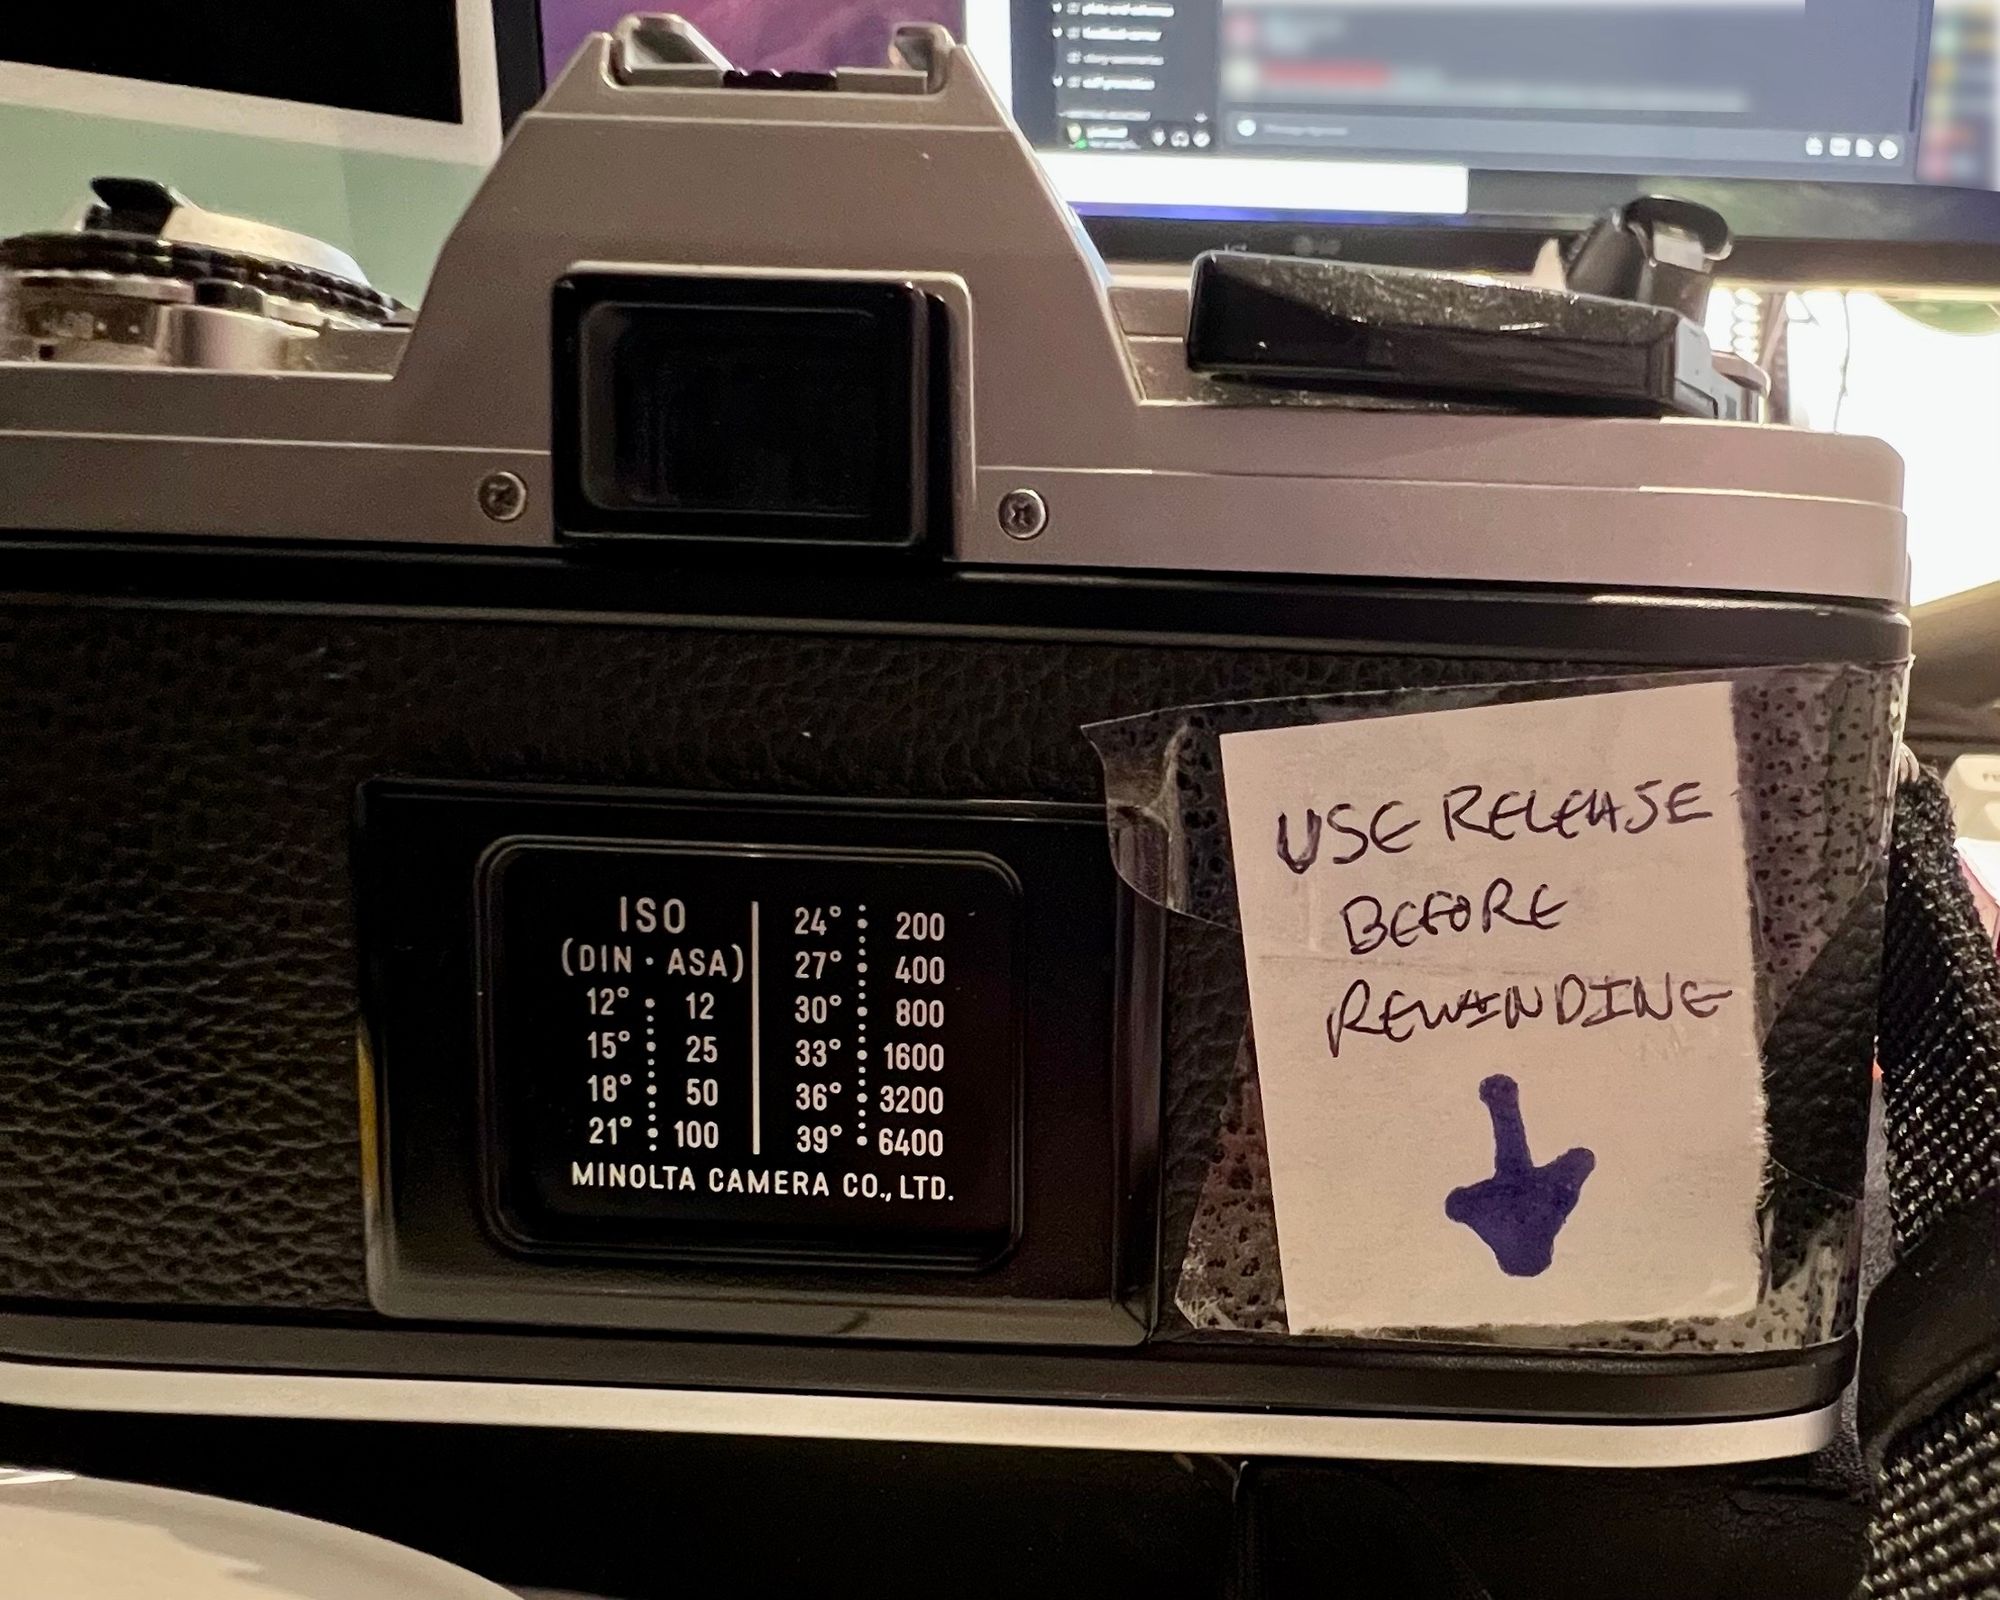 The back of a SLR camera with a note taped to the back saying "USE RELEASE BEFORE REWINDING" and an arrow pointing down.